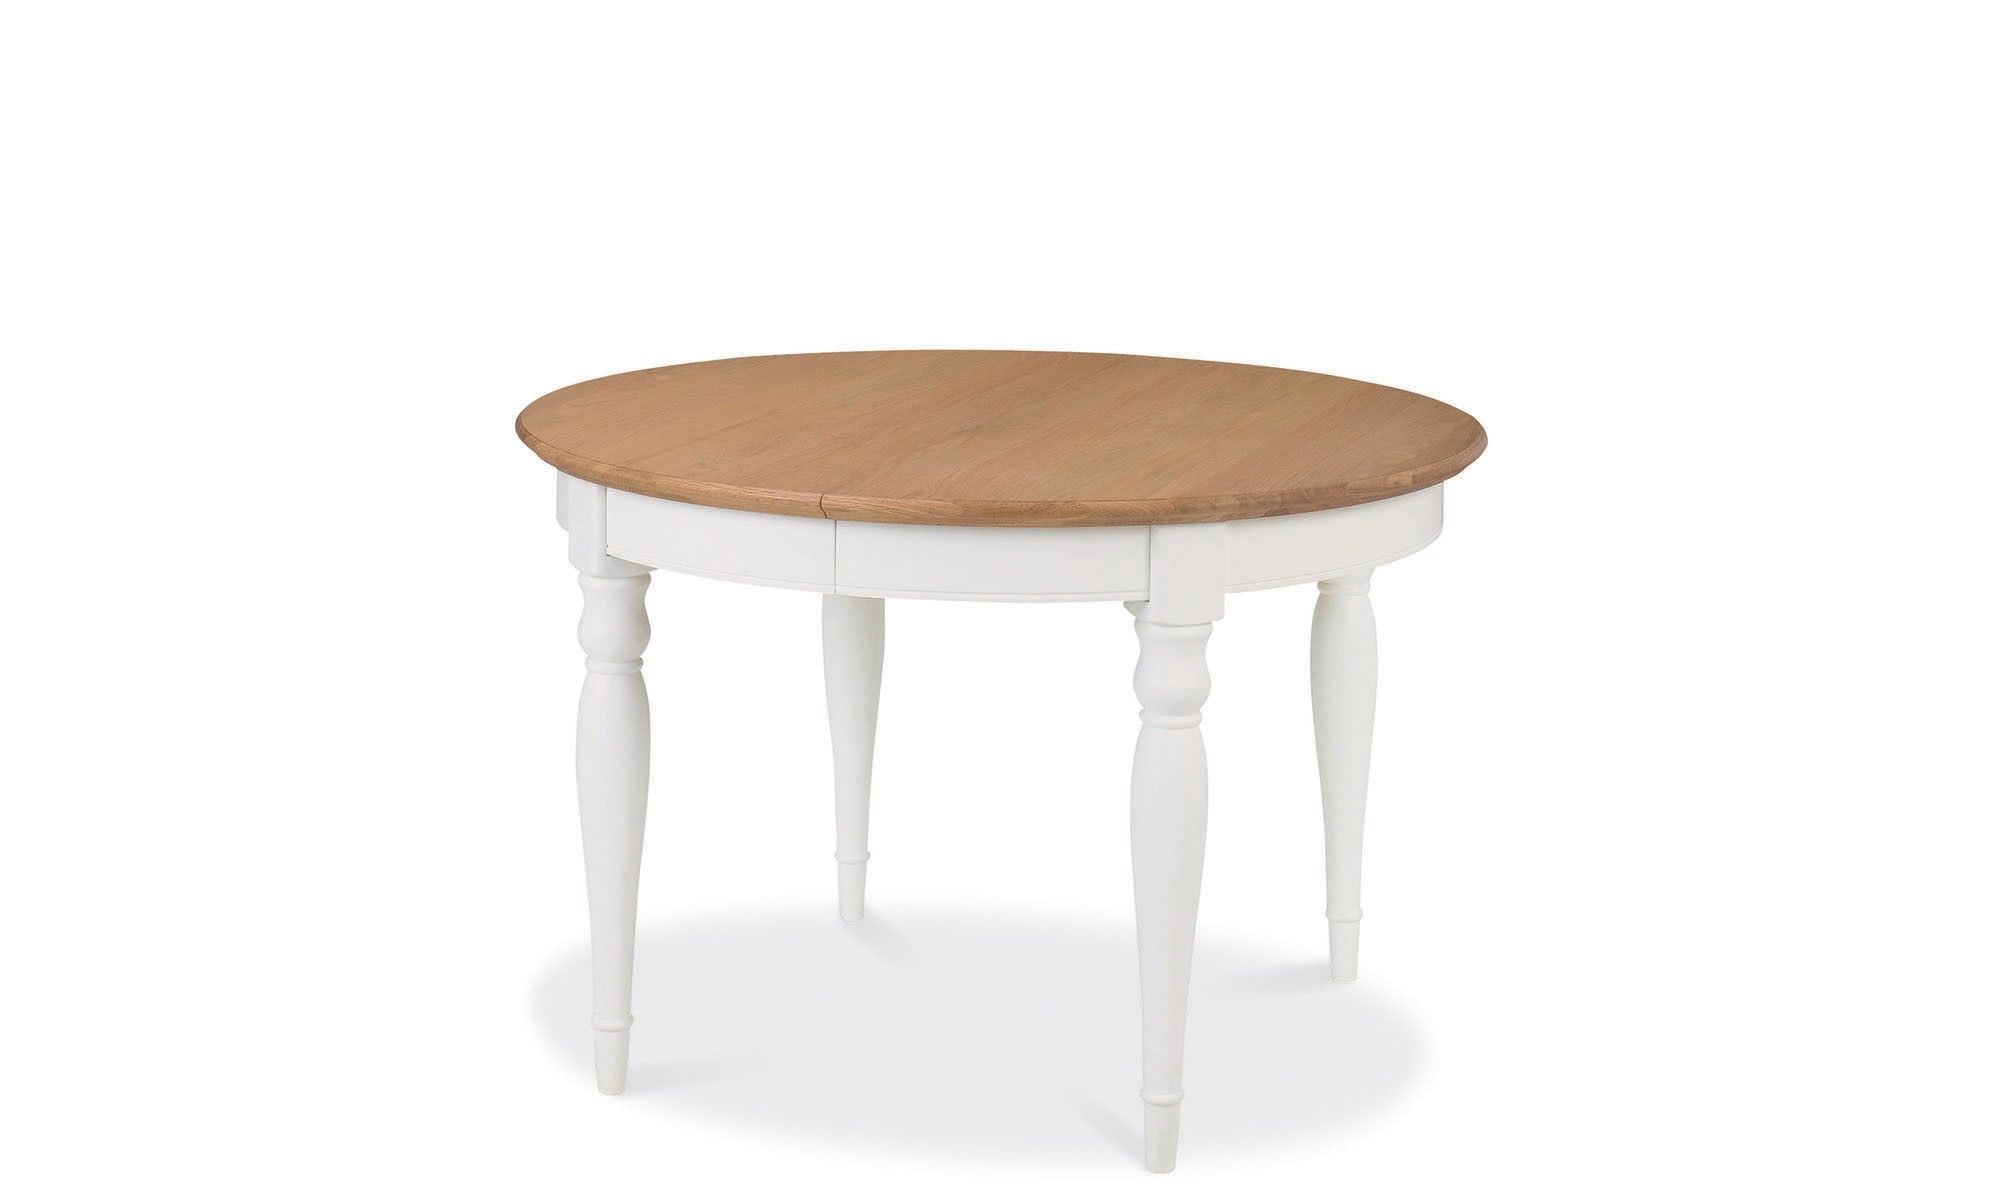 Georgie – Round Extendable Dining Table – Fishpools With Most Recent Extending Round Dining Tables (View 1 of 25)